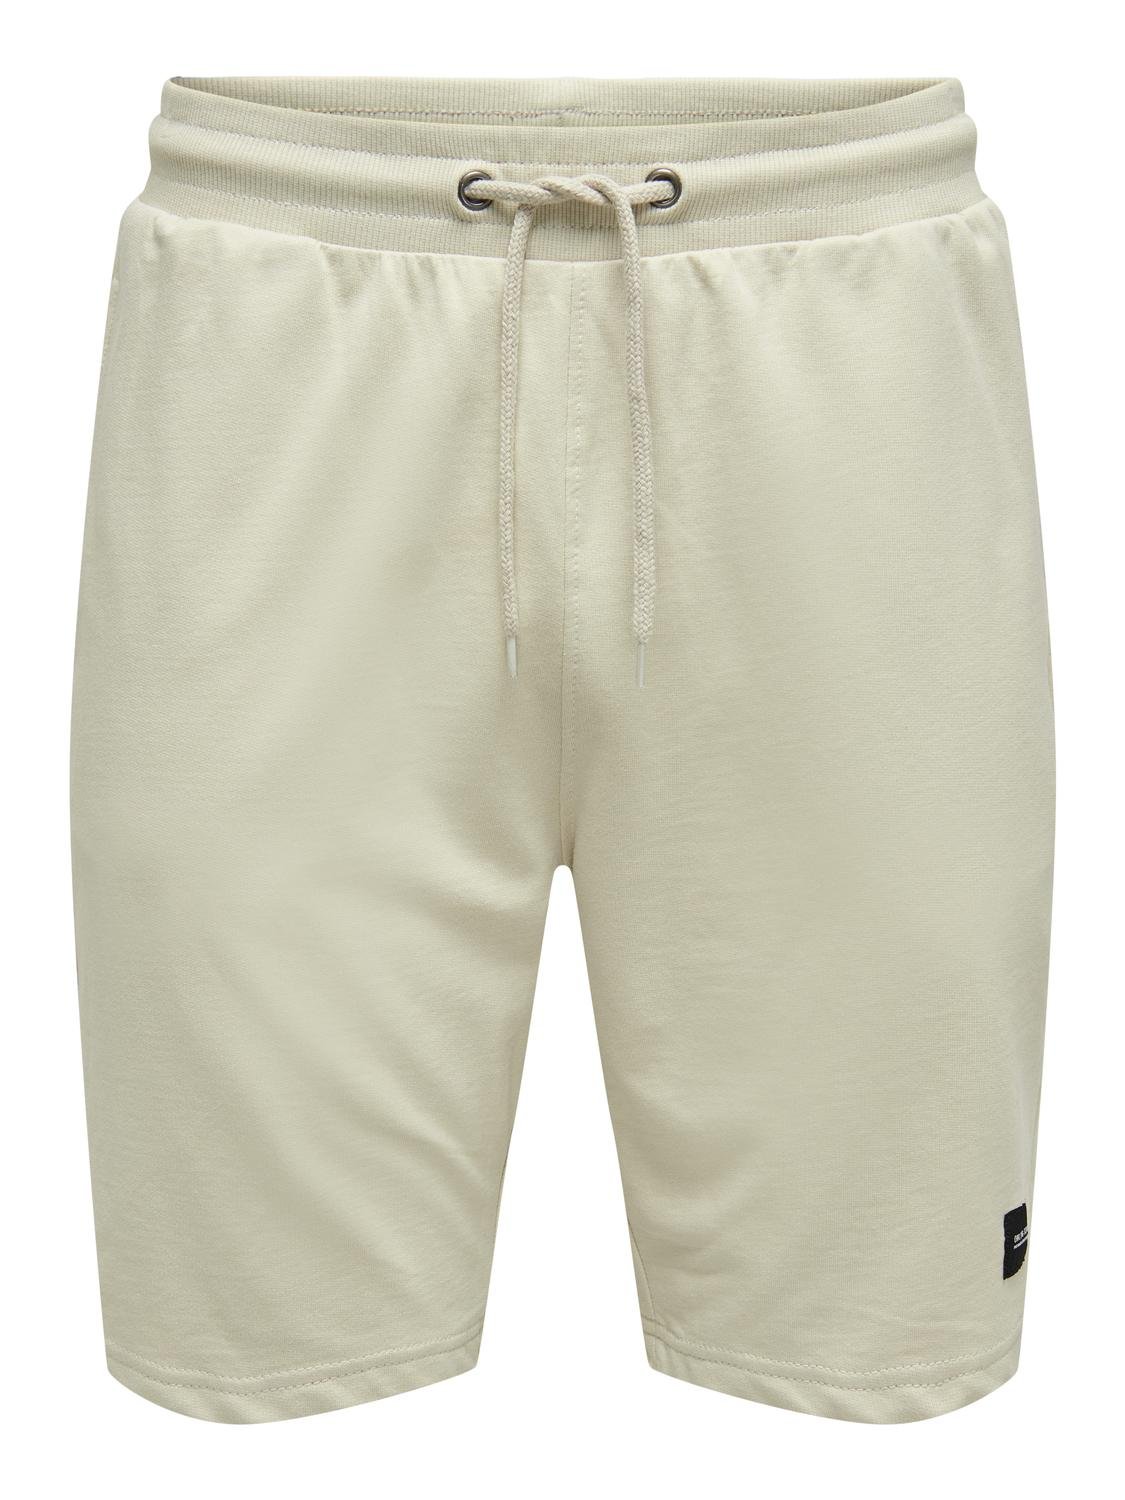 ONLY & SONS Regular Fit Sweat Shorts -Pelican - 22015623